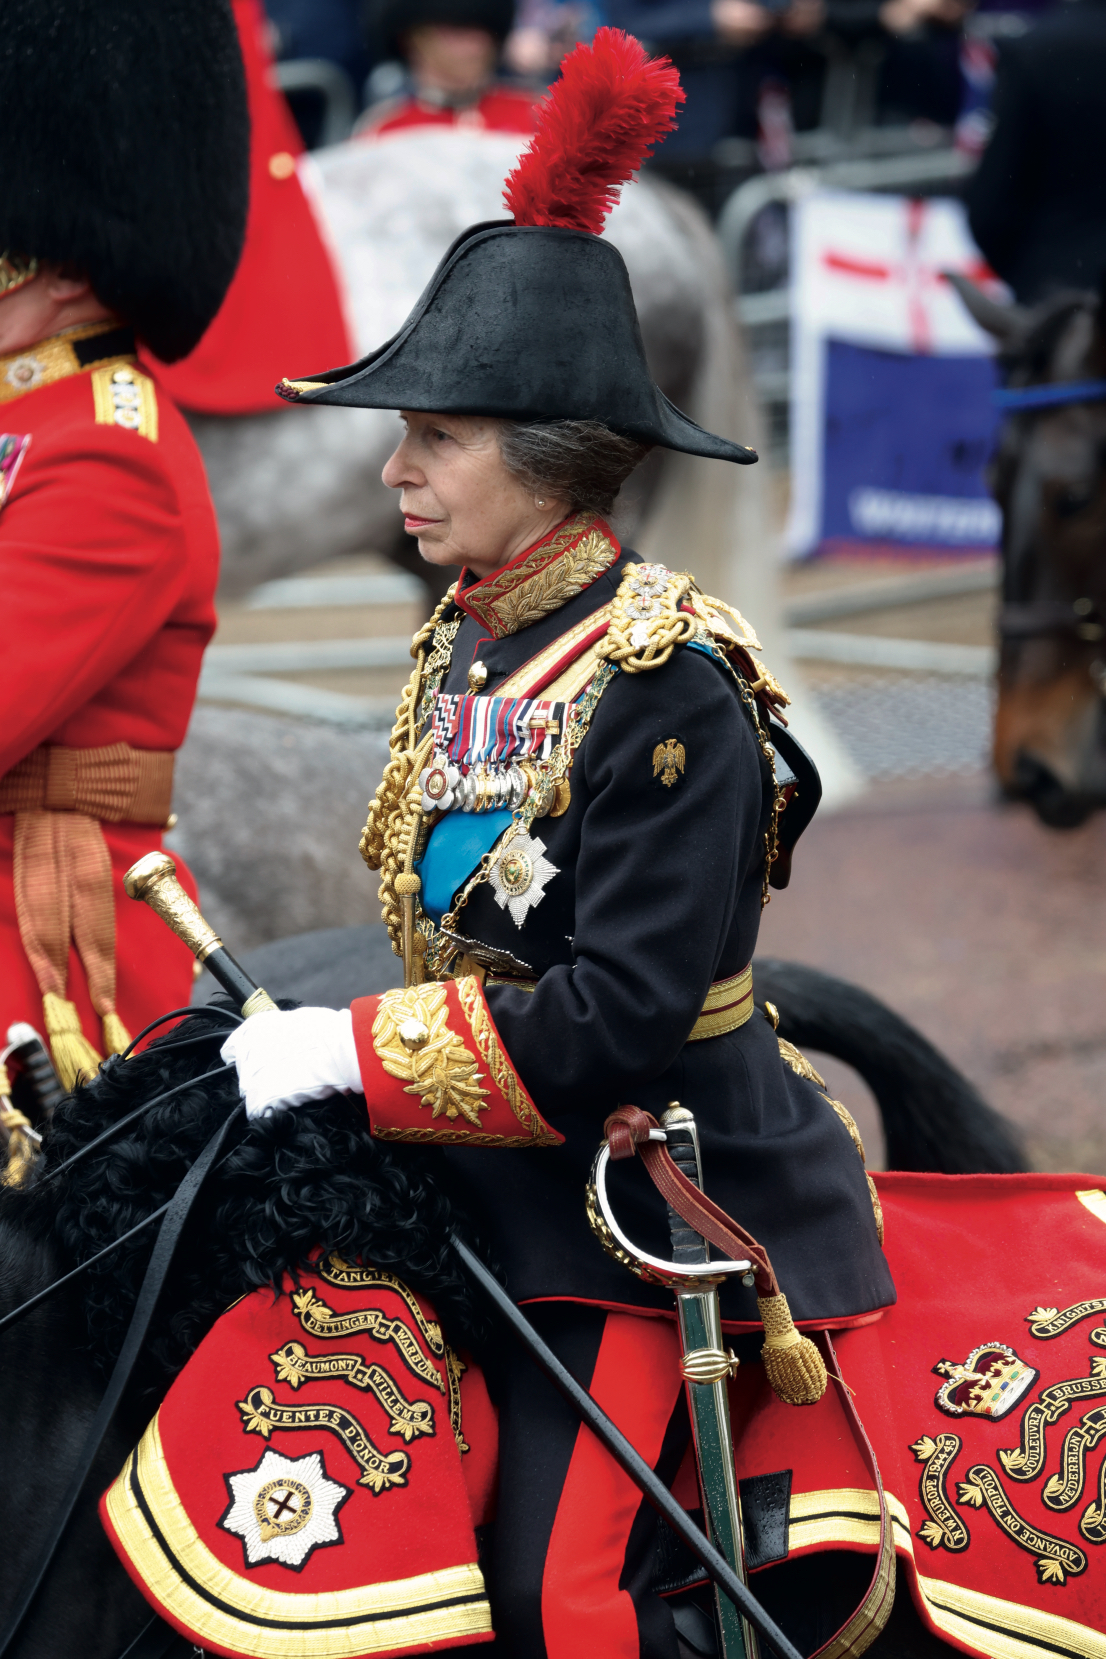 Princess Anne in her role as the Gold Stick